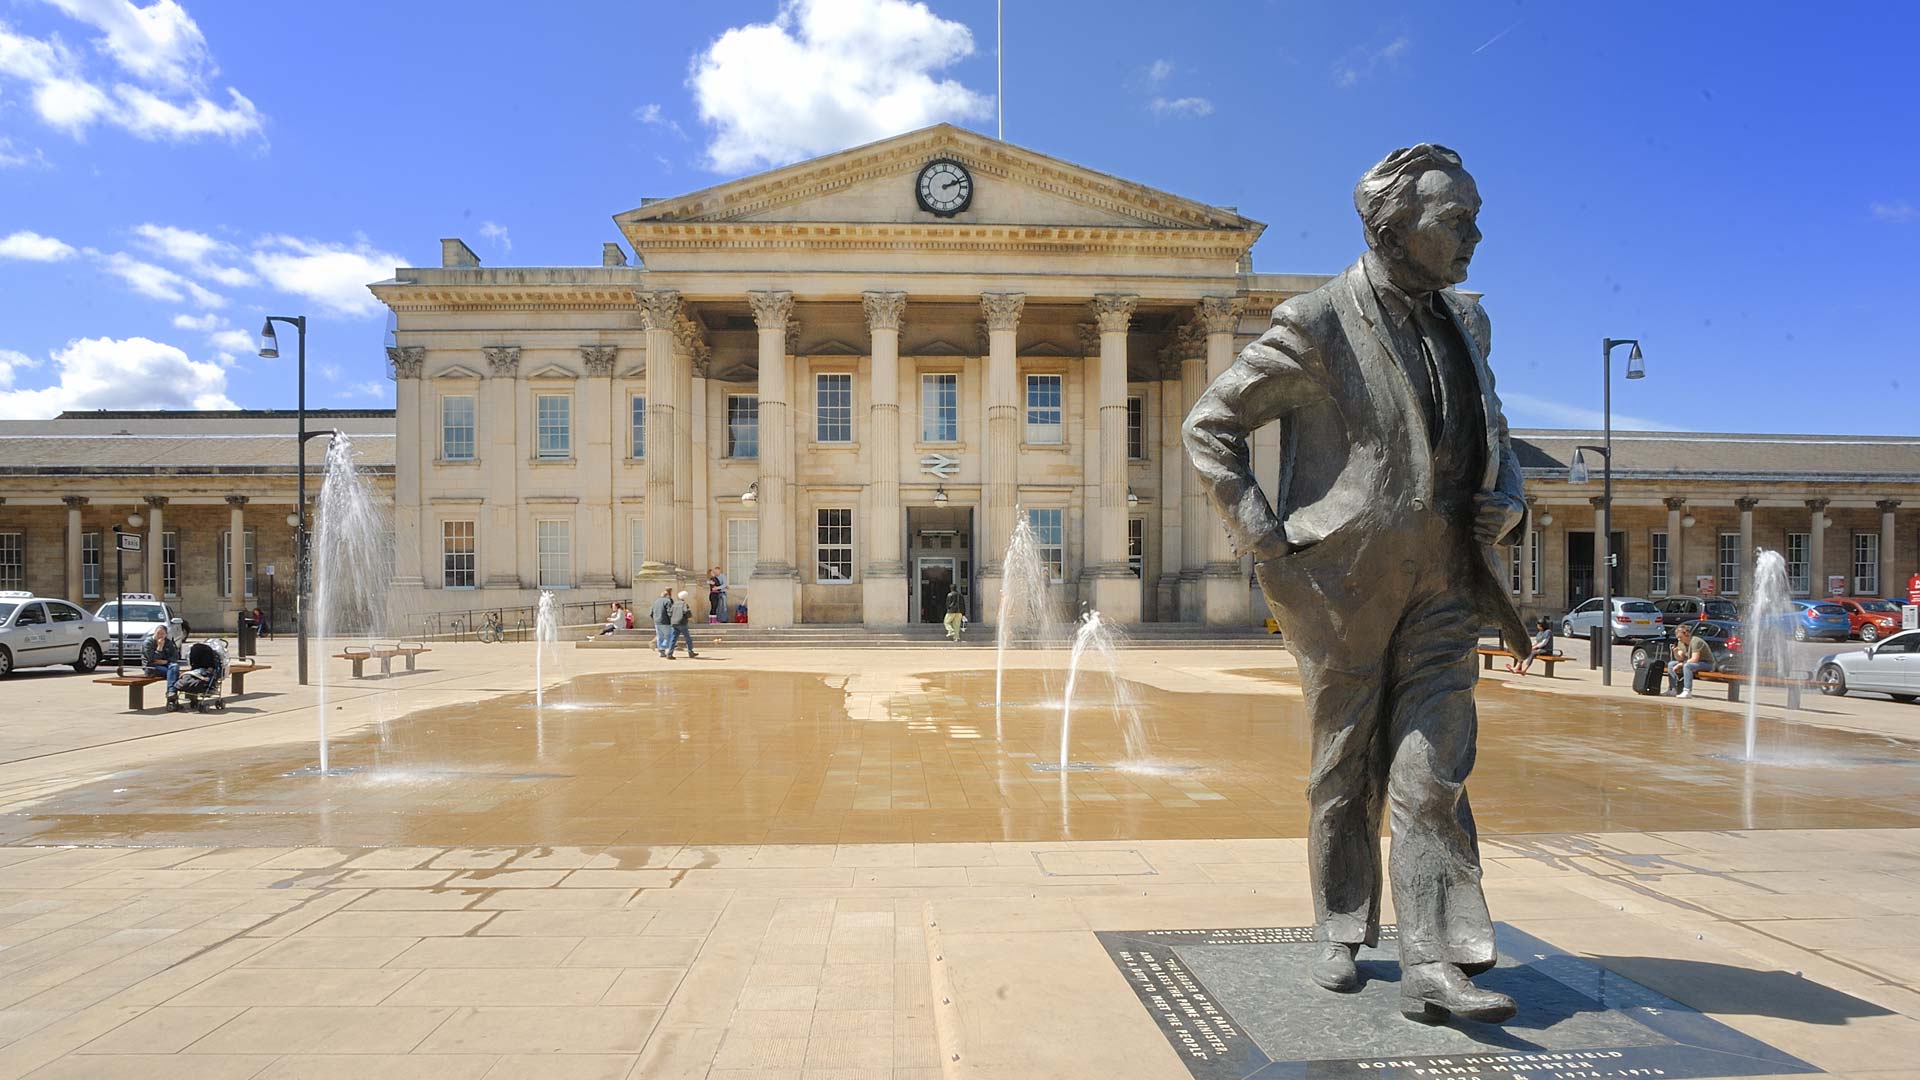 Picture of the Harold Wilson statue outside the Huddersfield train station.